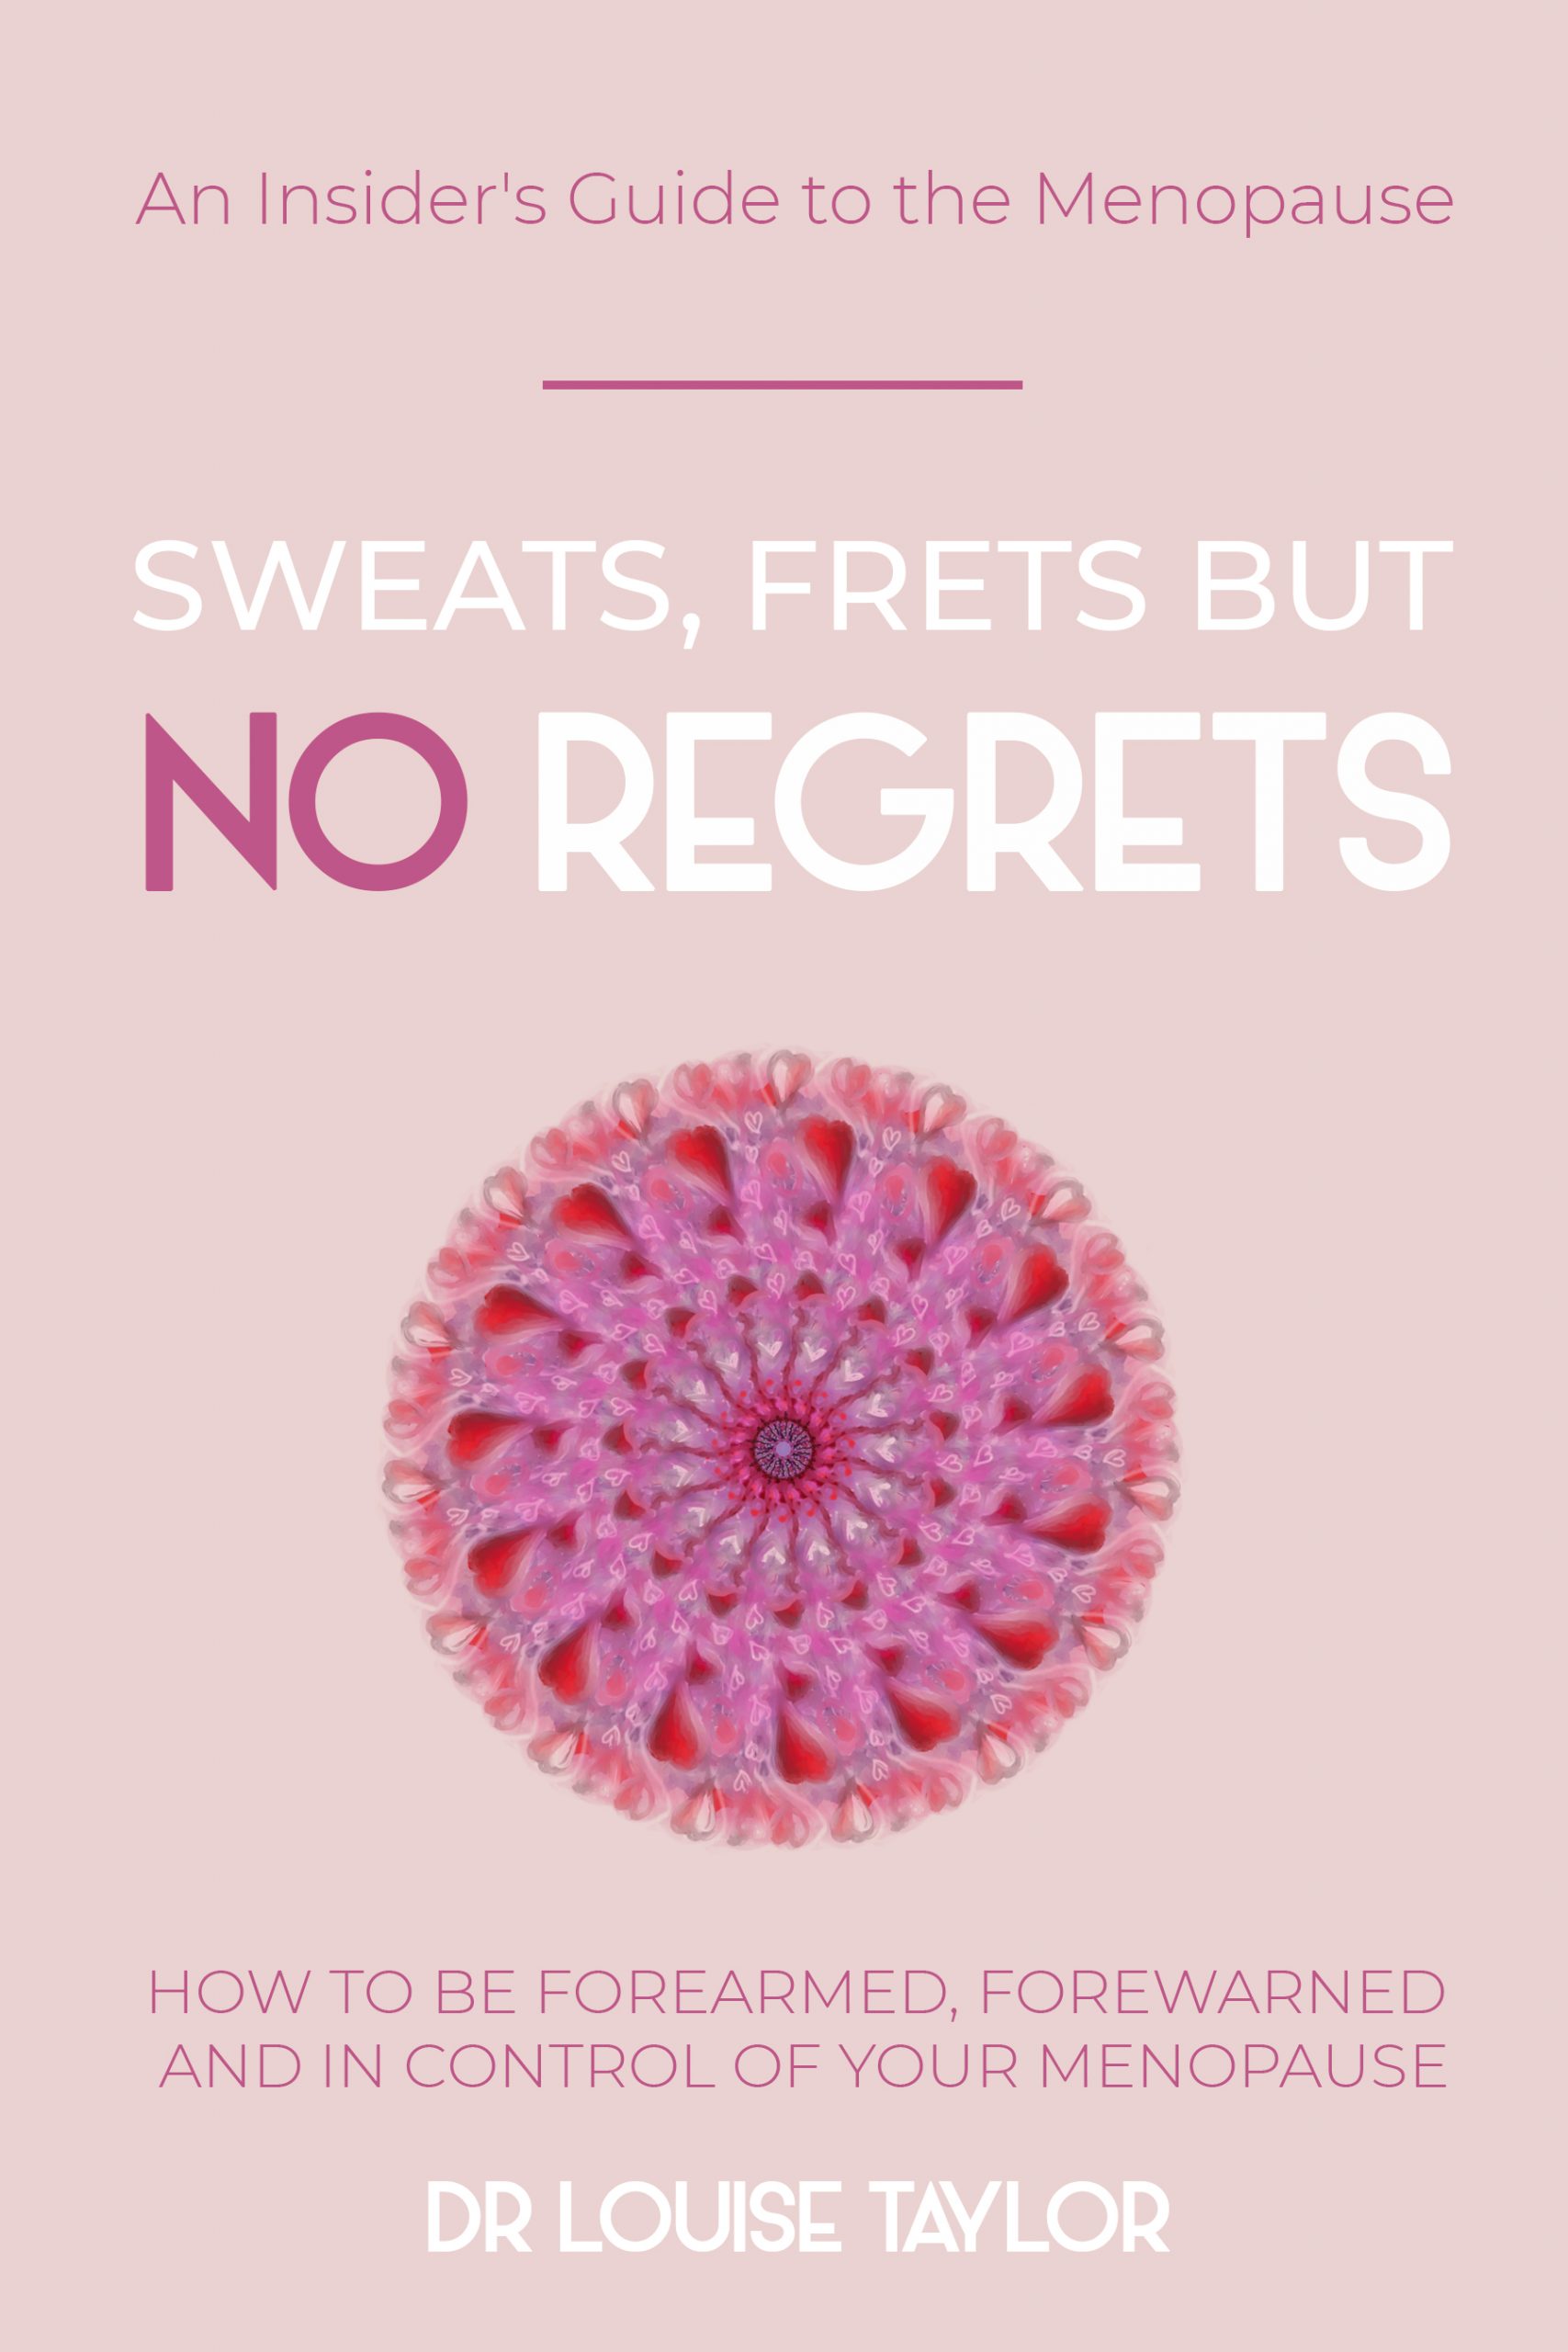 Sweats, Frets but no Regrets by Dr Louise Taylor